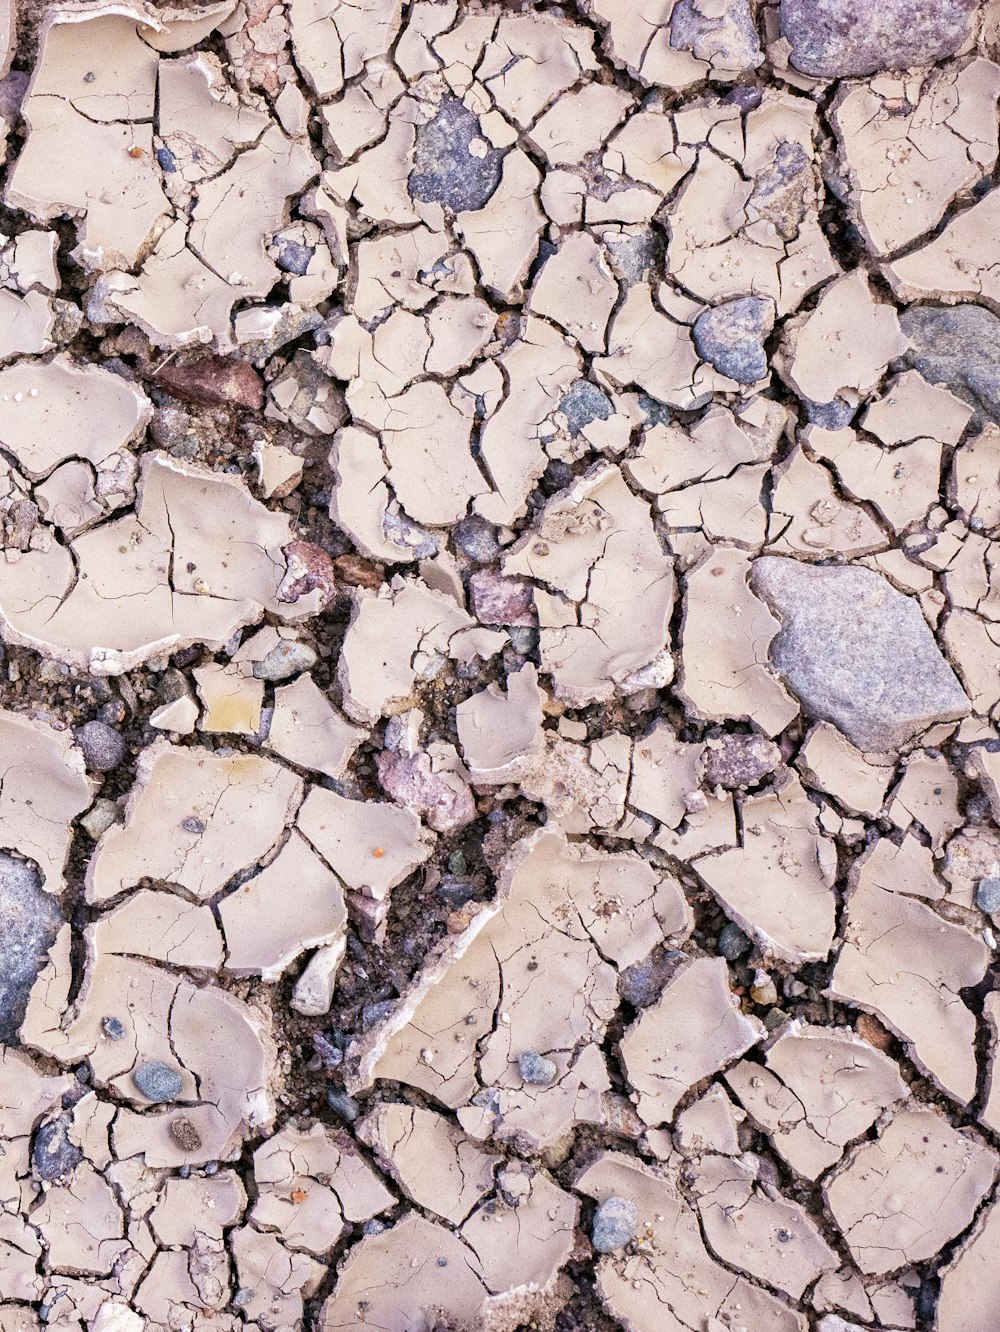 a close up of a cracked surface with rocks